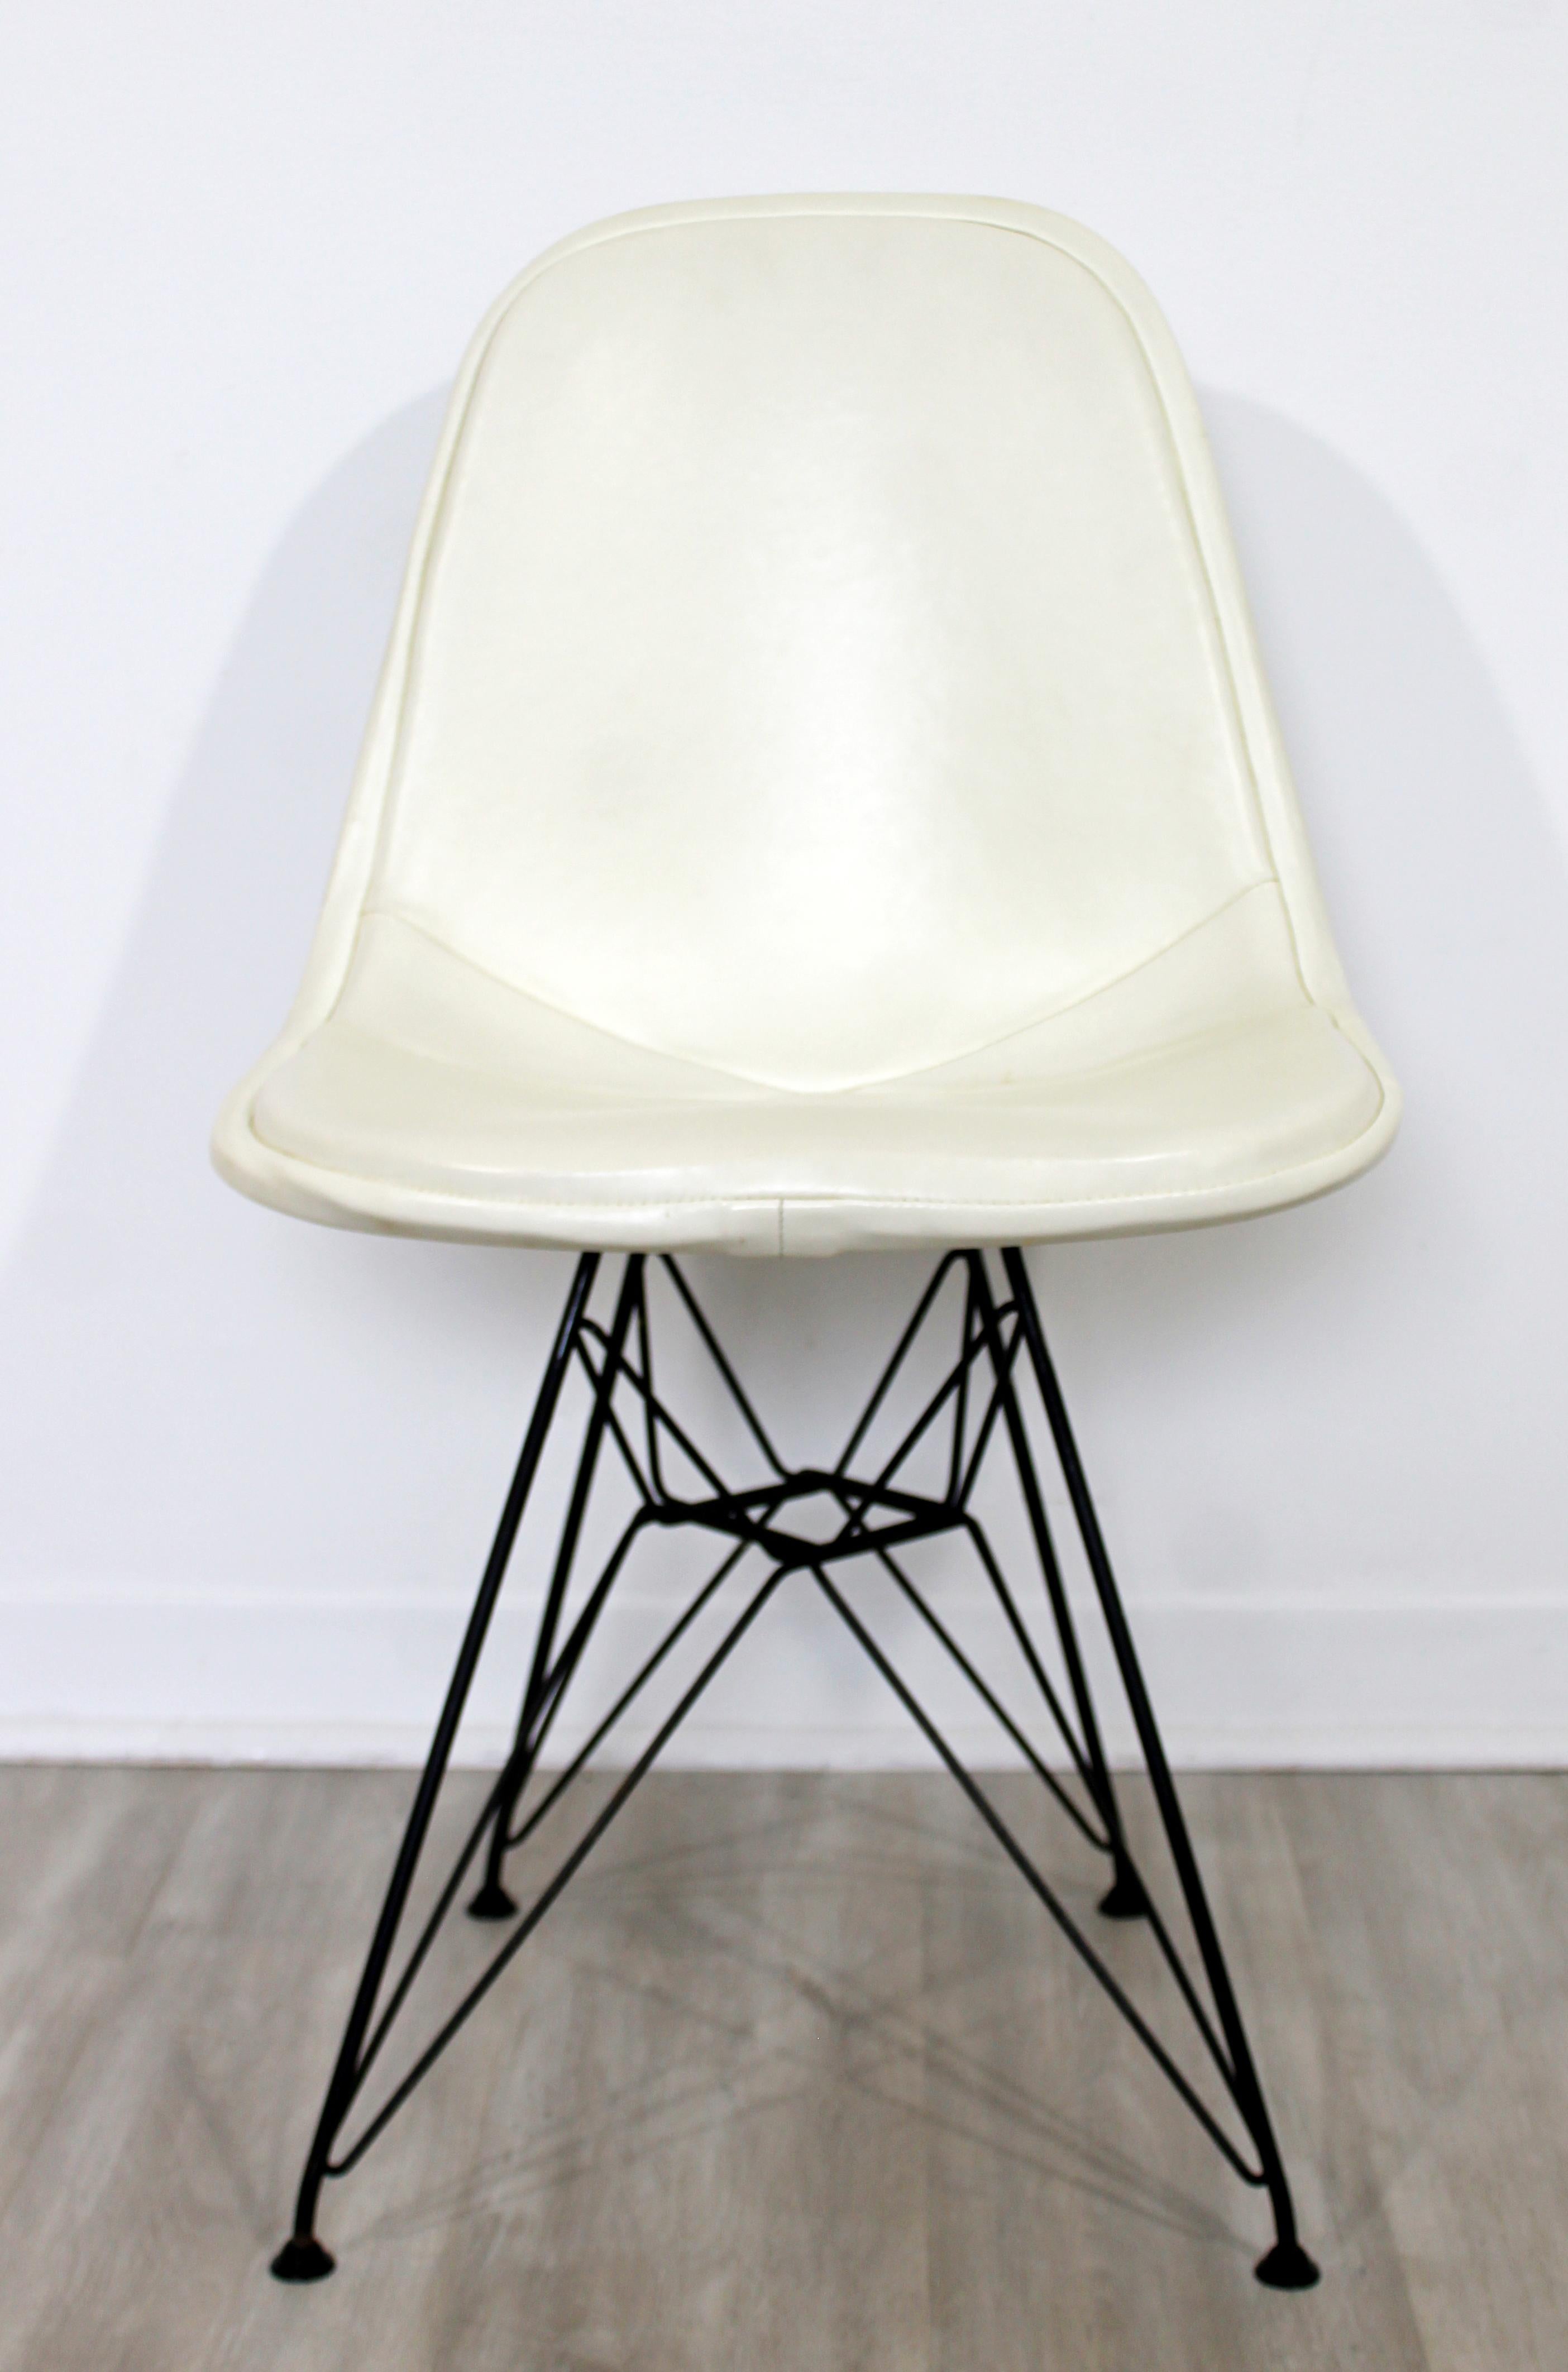 For your consideration is a fantastic, Charles Eames for Herman Miller, DKR side chair, with an 